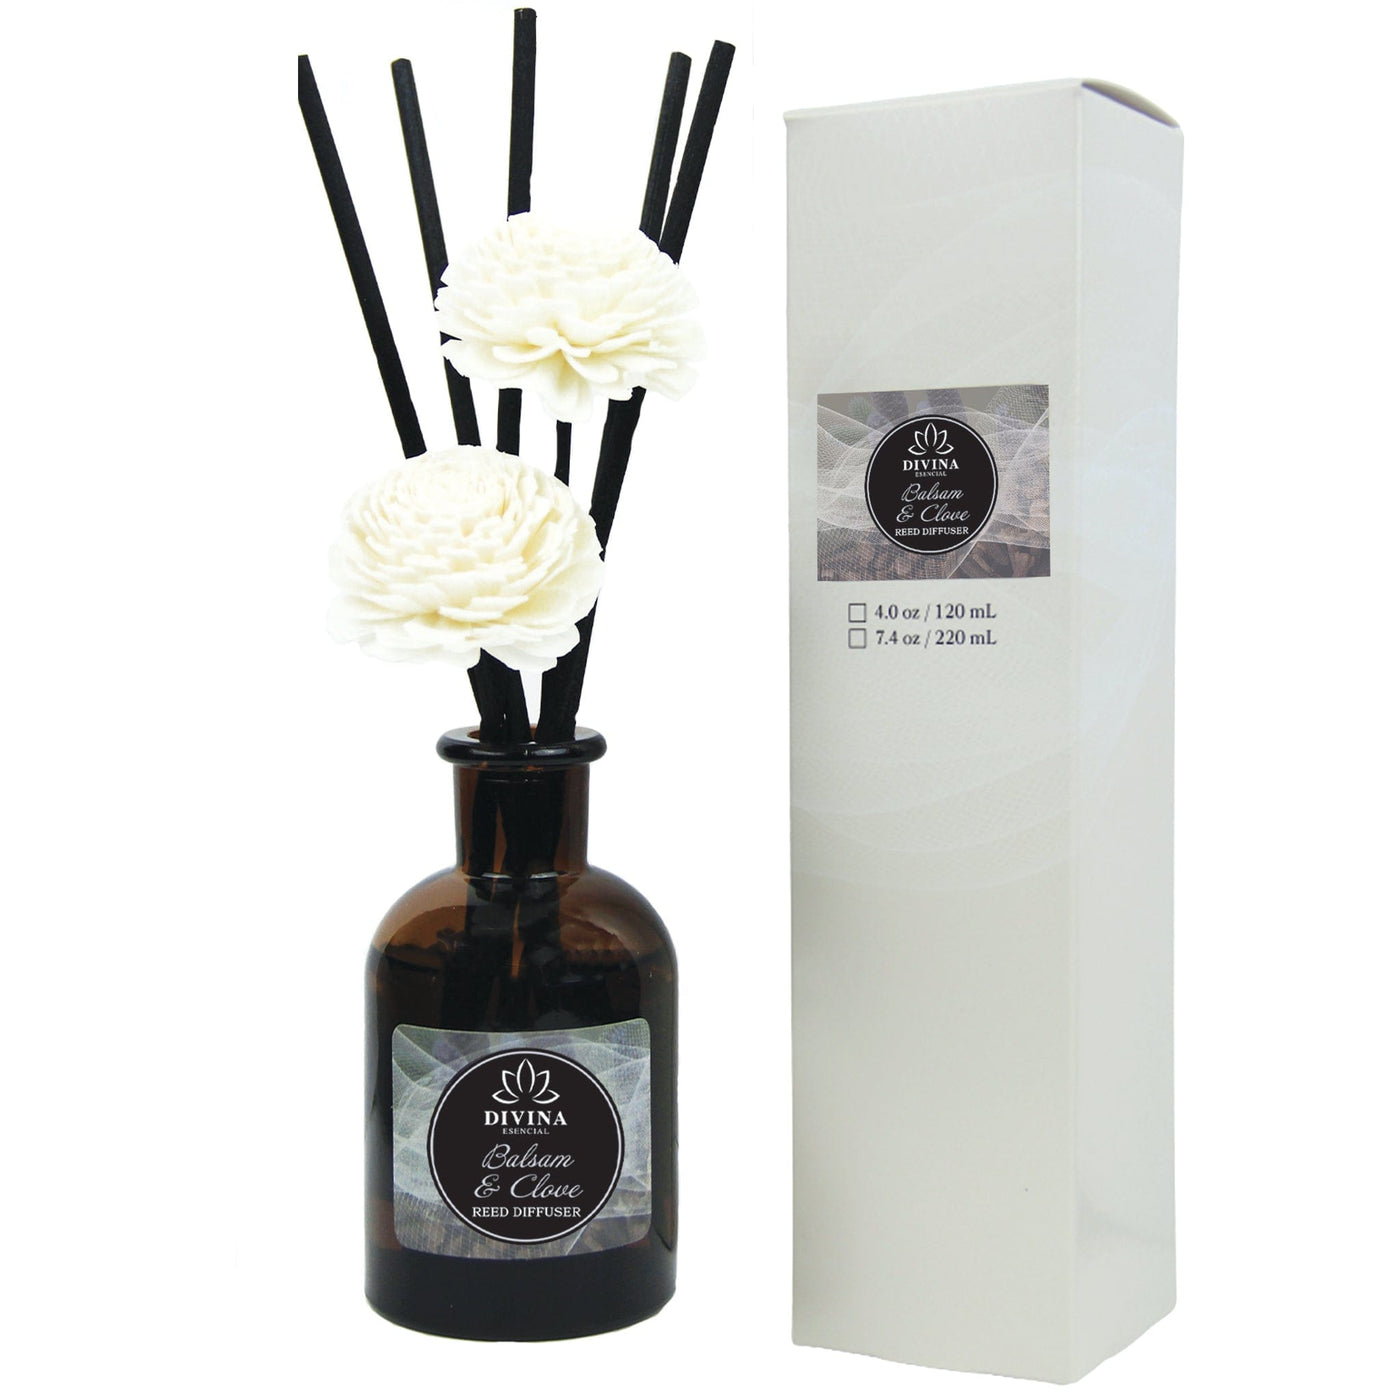 Balsam & Clove Holiday Reed Diffuser